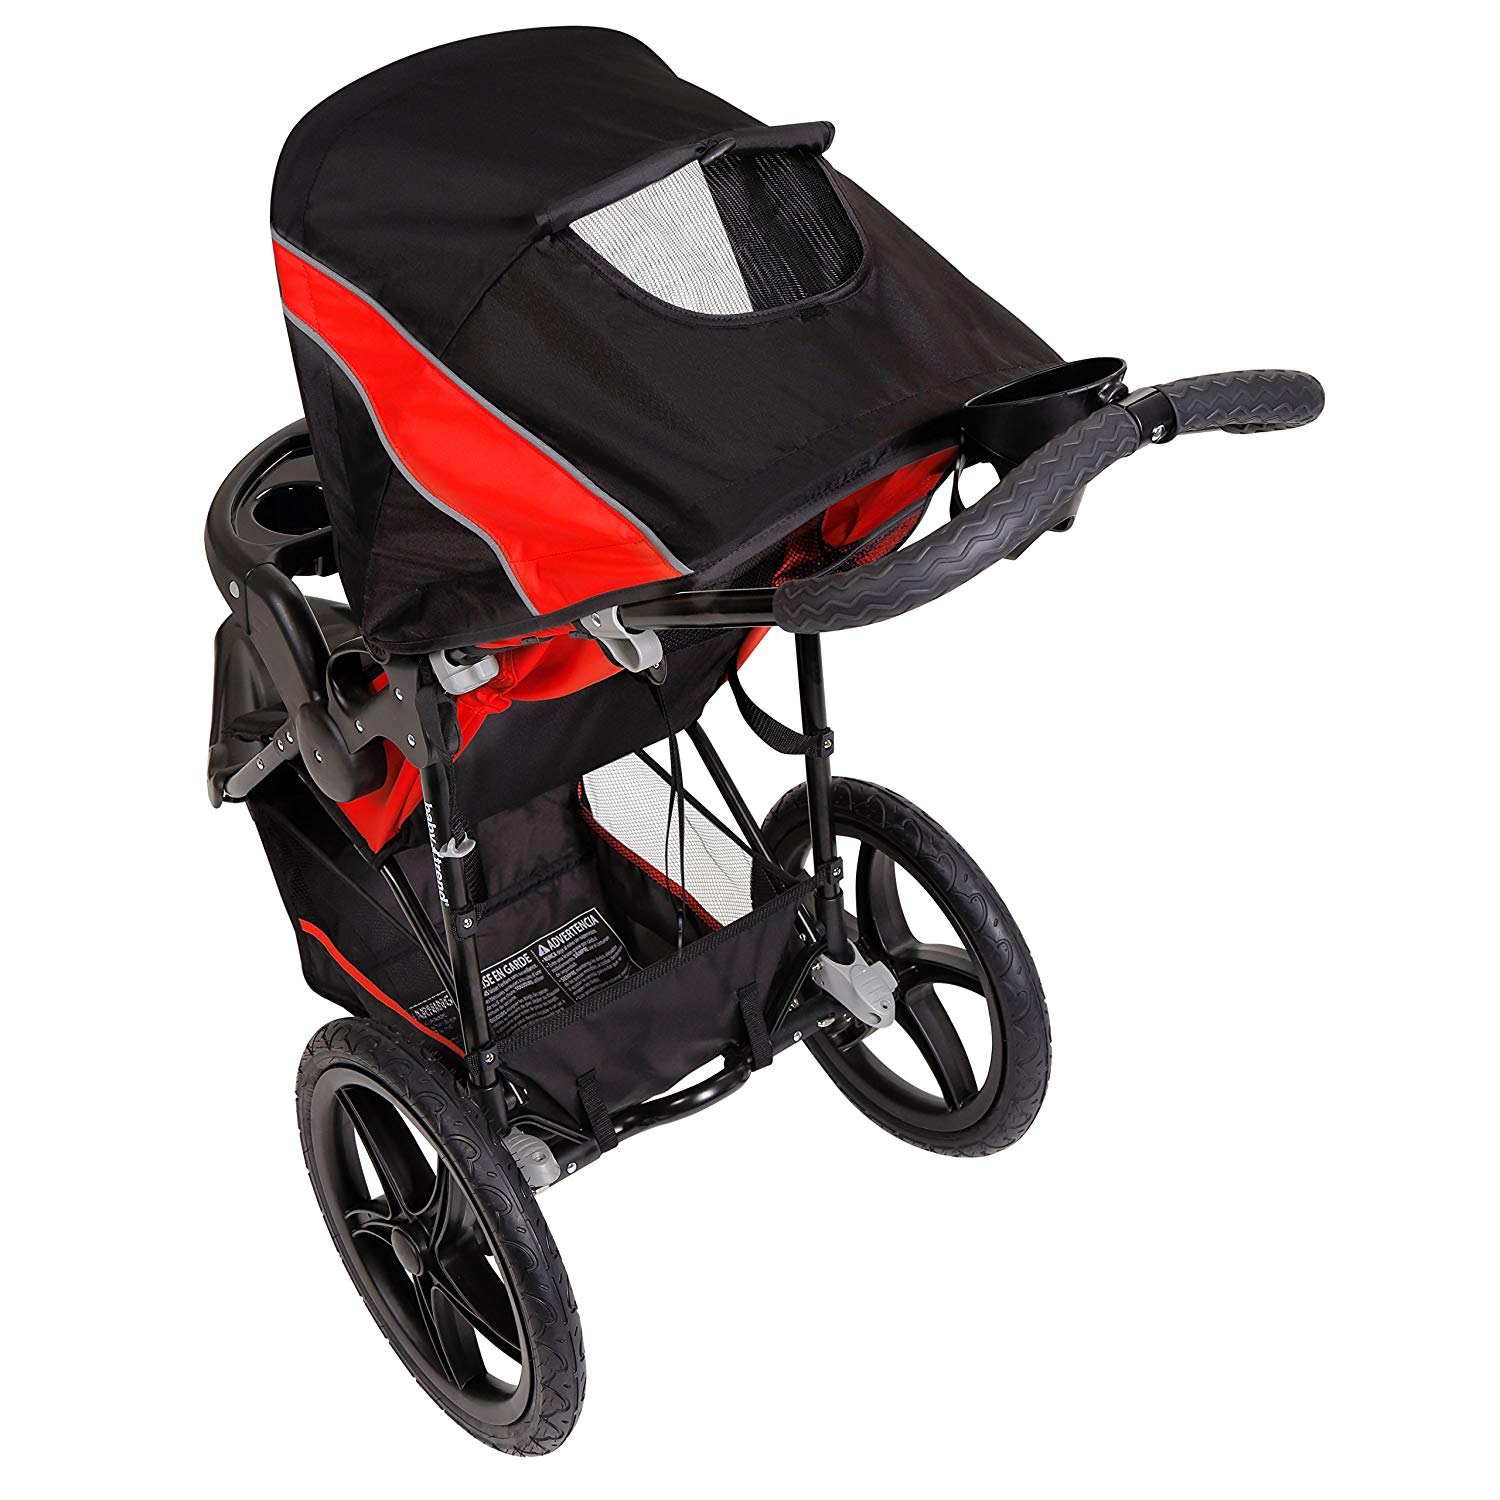 Baby Trend XCEL Infant/Child All Terrain Fitness Travel Jogger Stroller, Picante - image 5 of 6